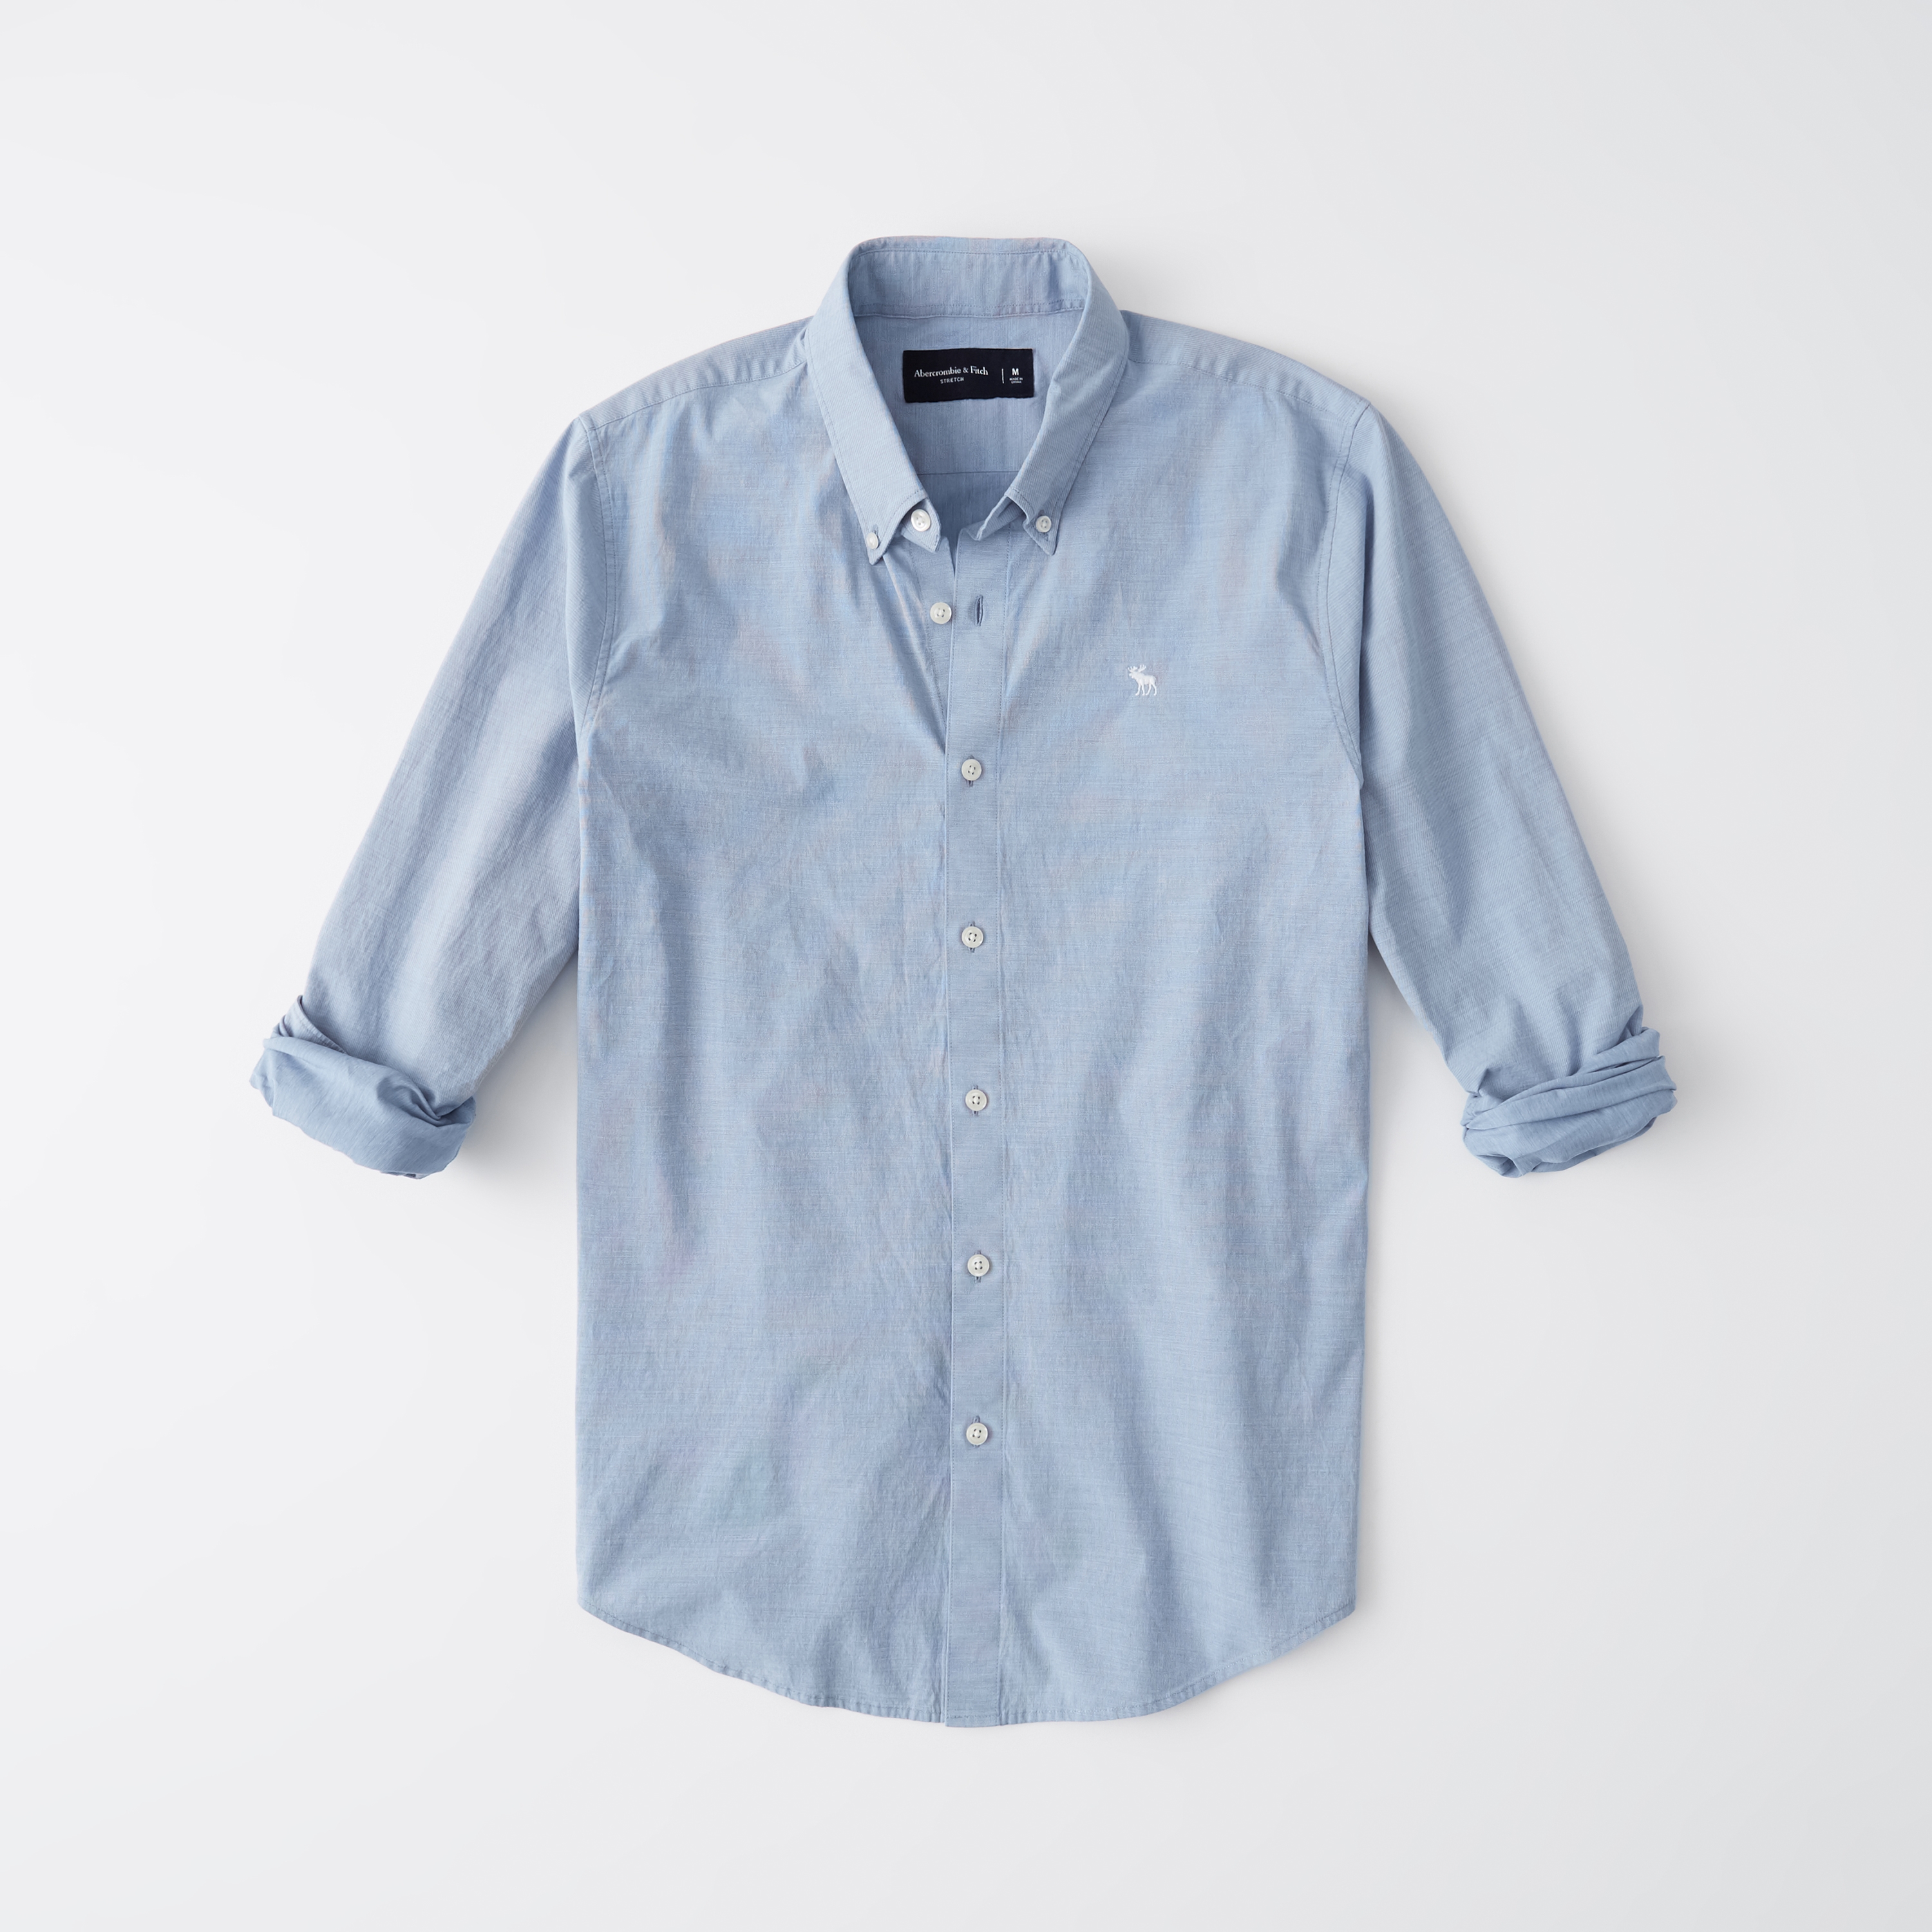 abercrombie & fitch casual shirts